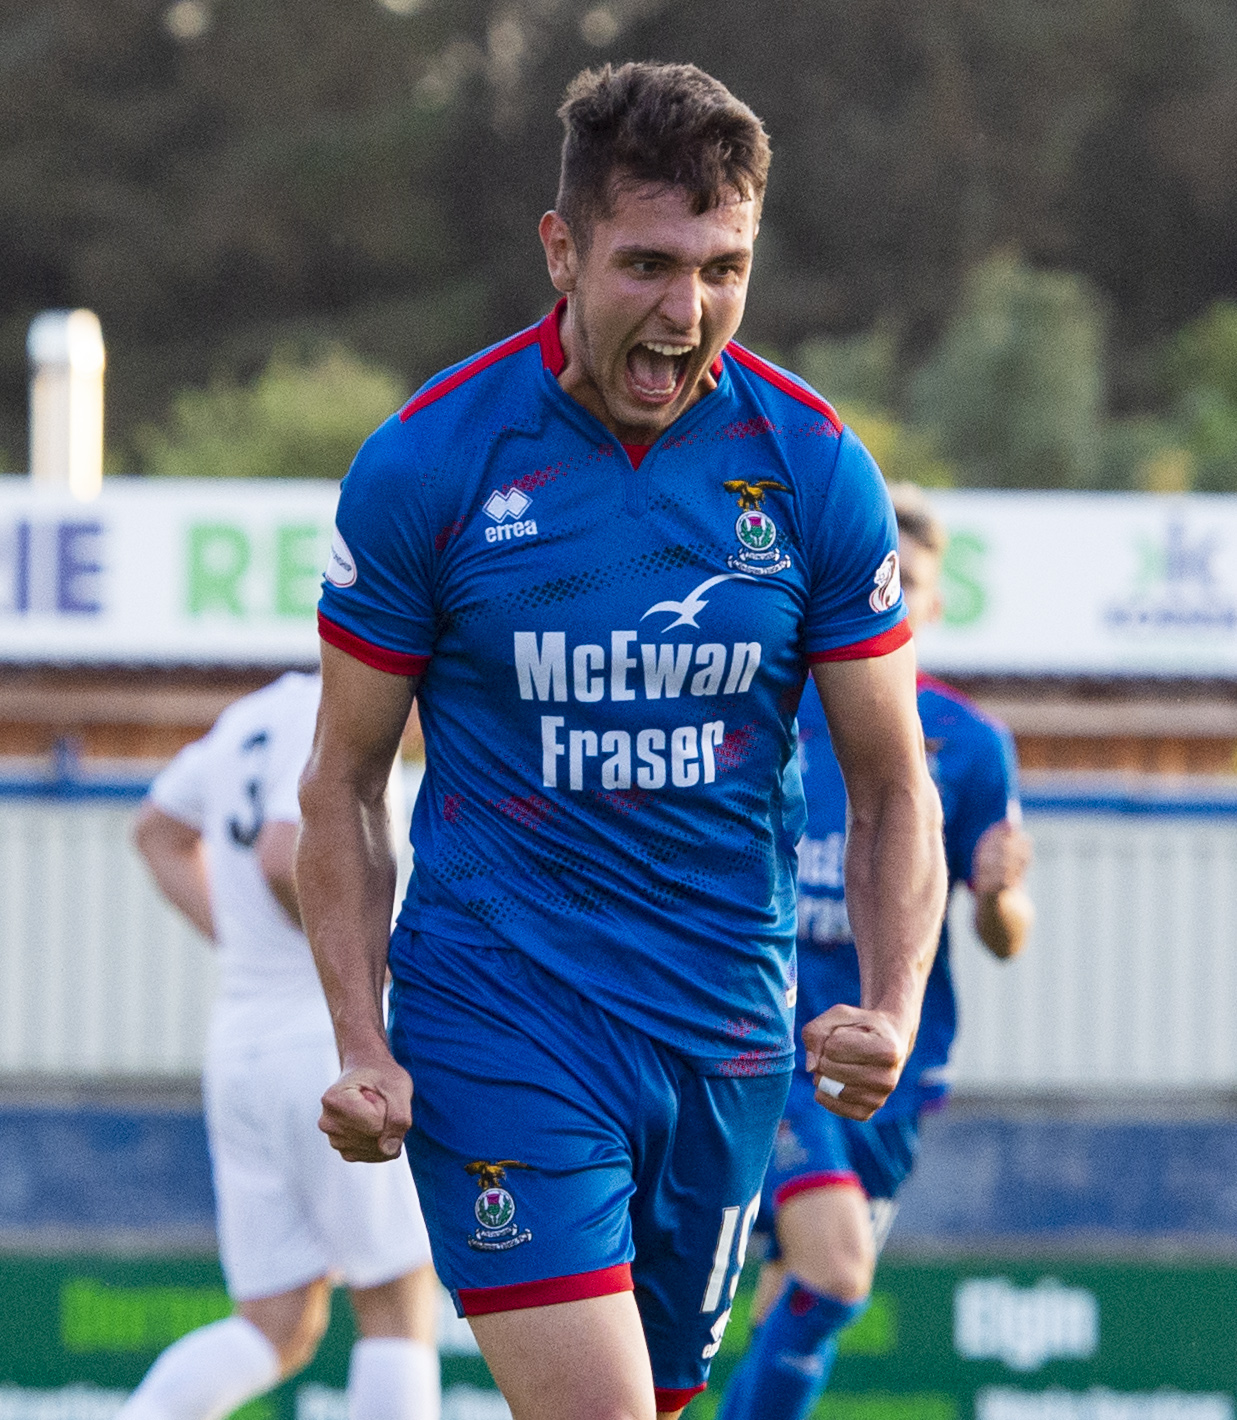 23/07/19 BETFRED CUP: GROUP D
INVERNESS CT V COVE RANGERS
CALEDONIAN STADIUM - INVERNESS
Inverness’ Nikolay Todorov celebrates his goal to make it 3-2